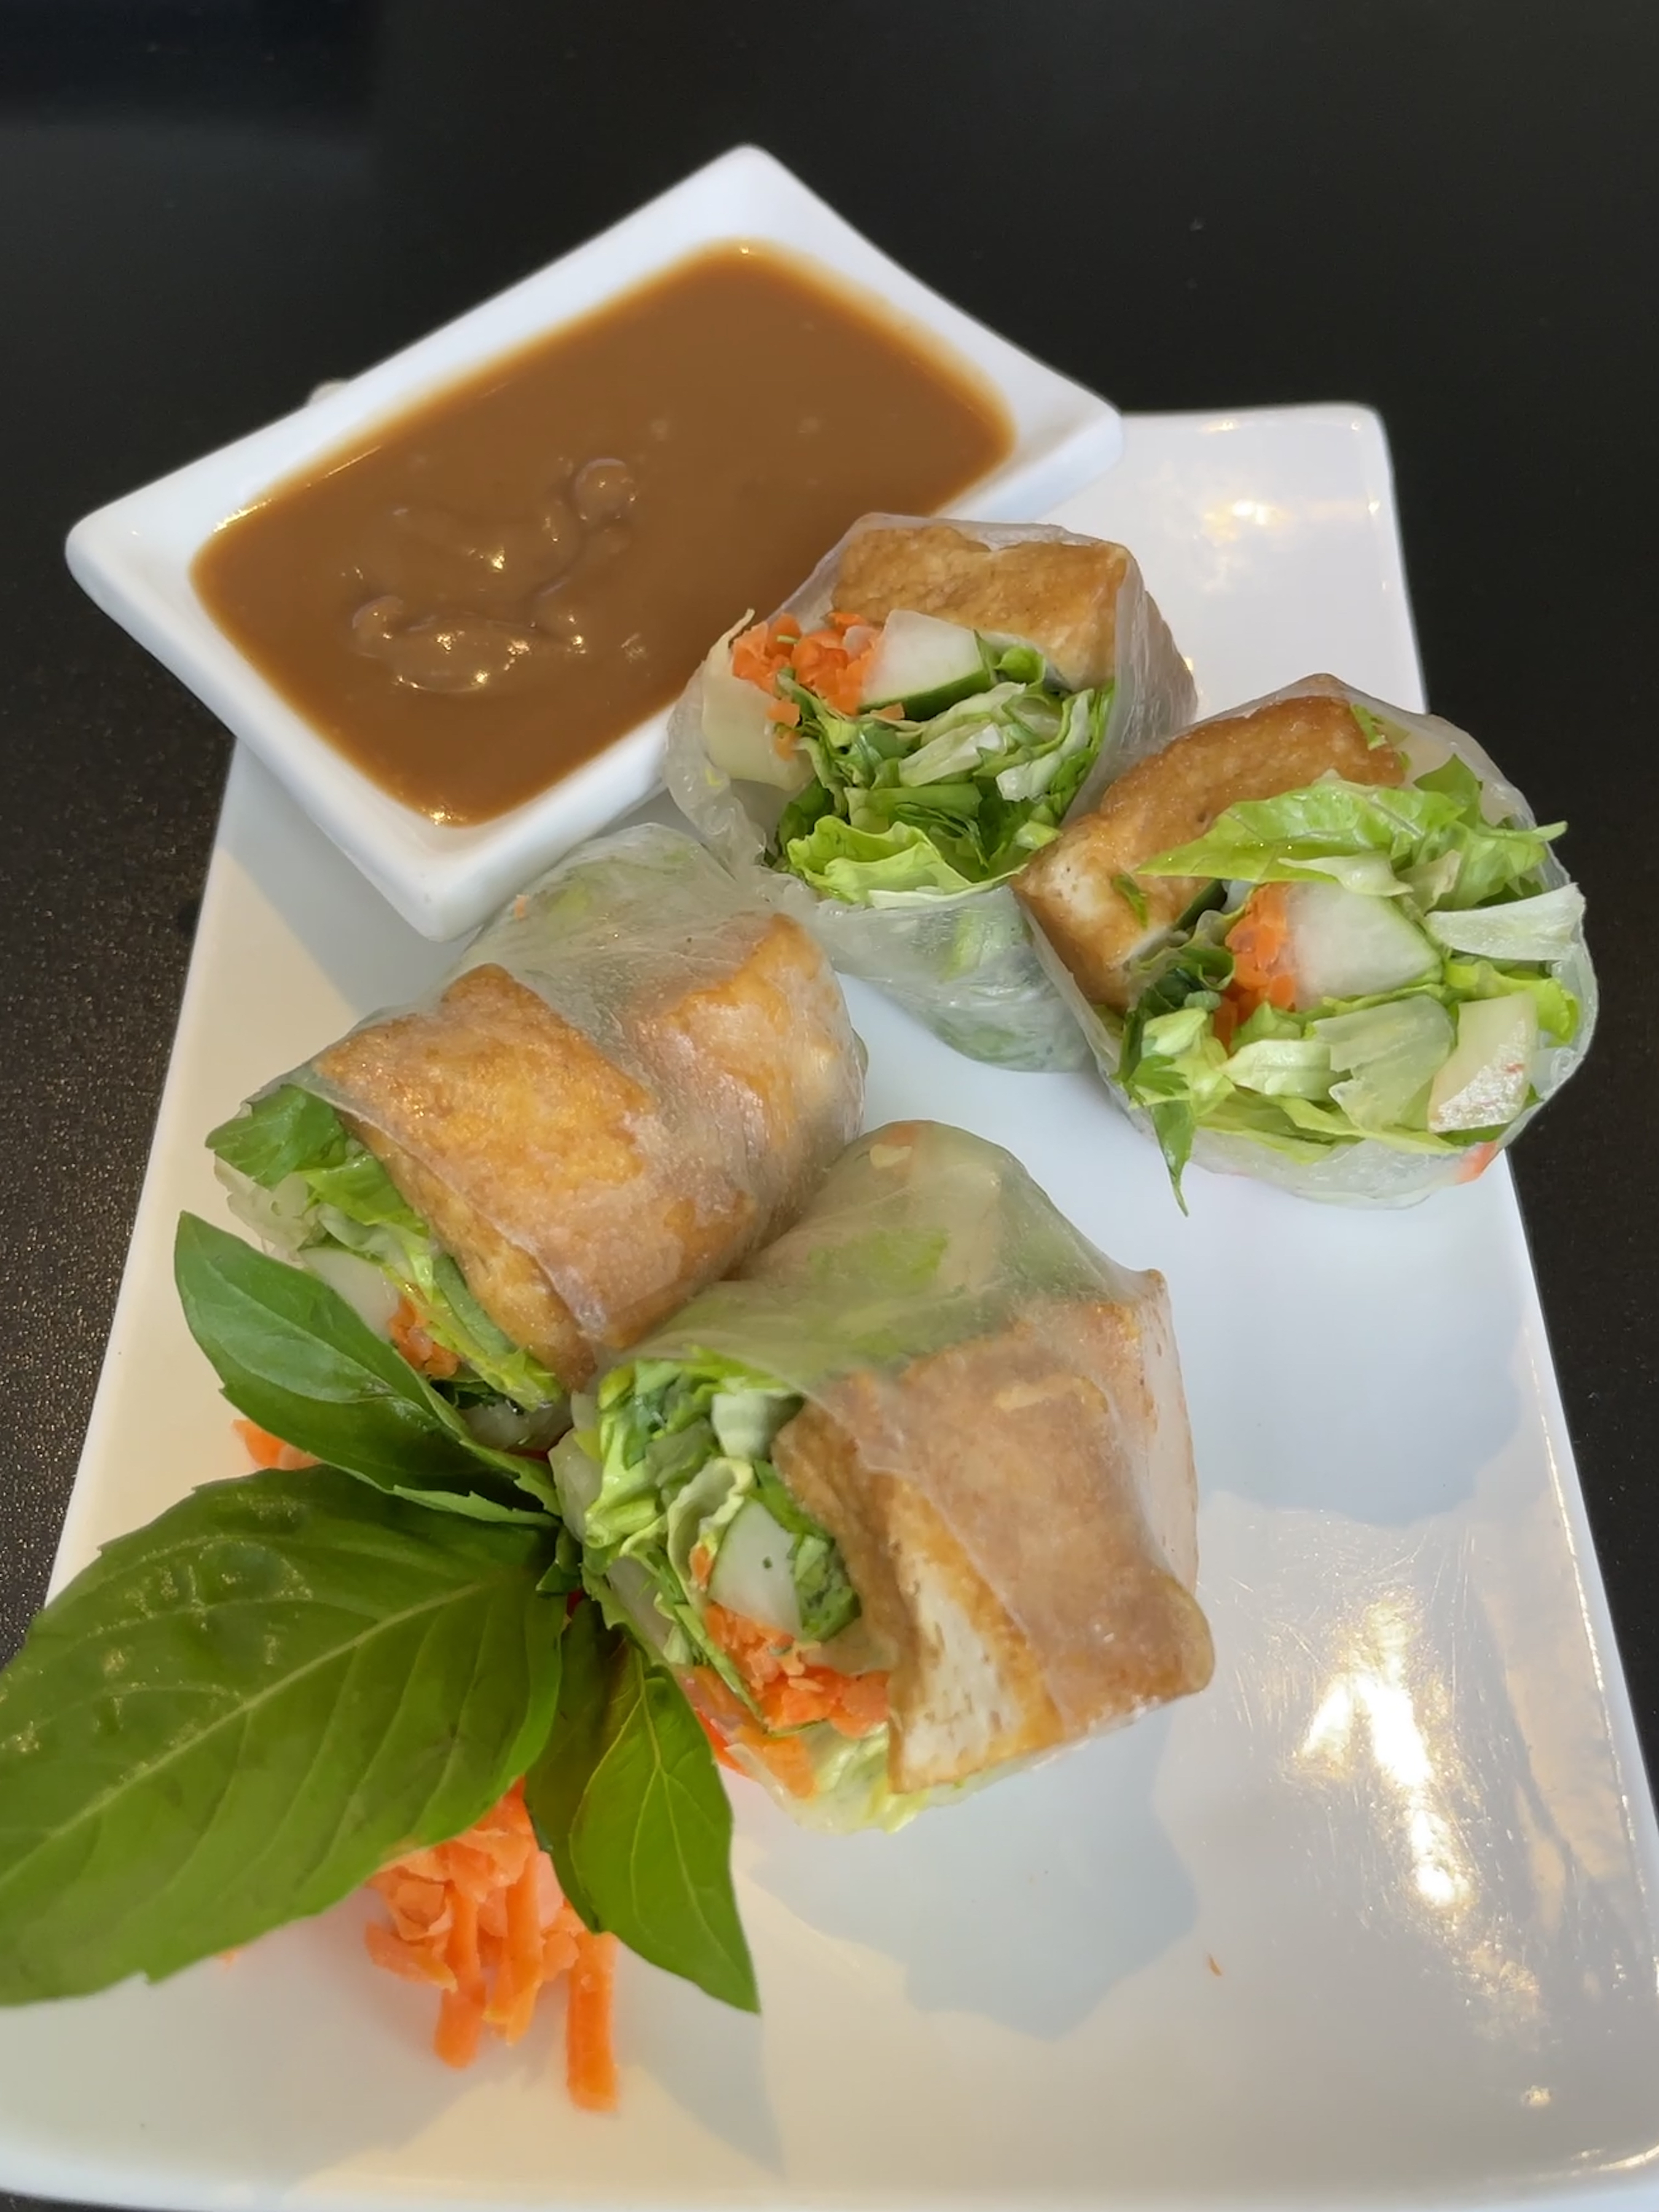 Spring rolls ("rollz" on the Eatz menu) come with your choice of shrimp and pork or tofu rolled in translucent rice paper.